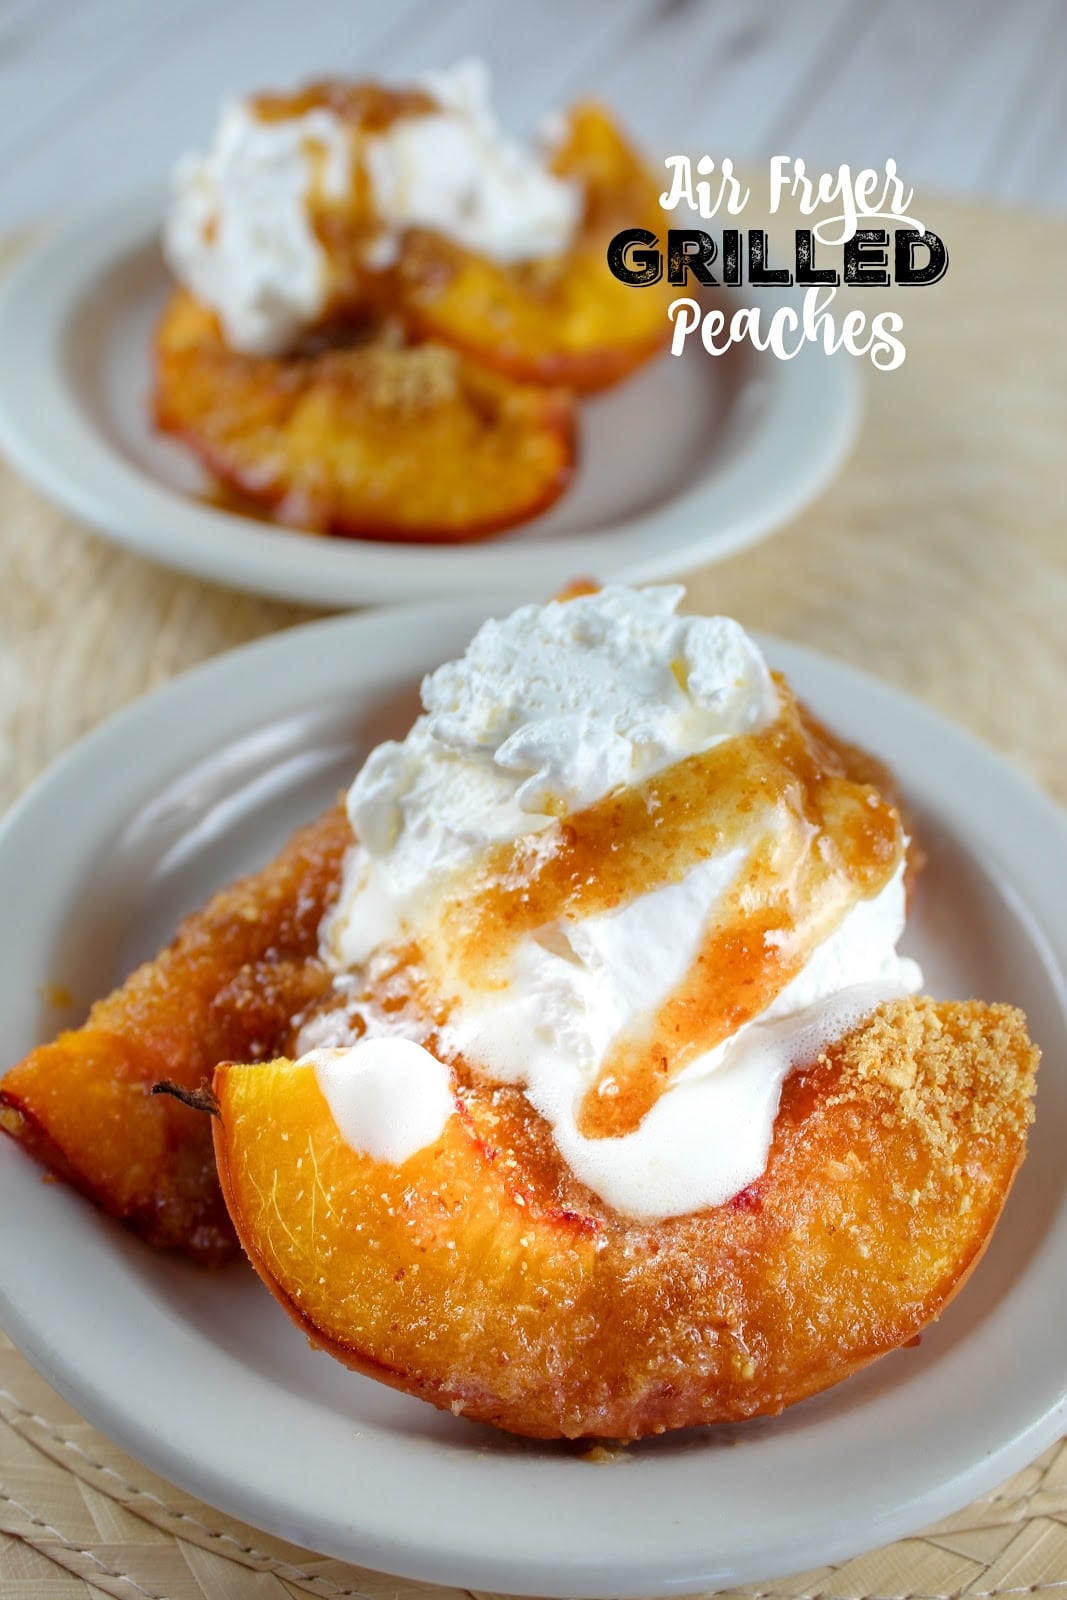 Grilled peaches are such a summertime treat - but sometimes you don't want to heat up the grill just for a couple of peaches! Now you can make grilled peaches in your air fryer!! They're ready in minutes and just as delicious (even if your peaches aren't quite ripe!)  via @foodhussy